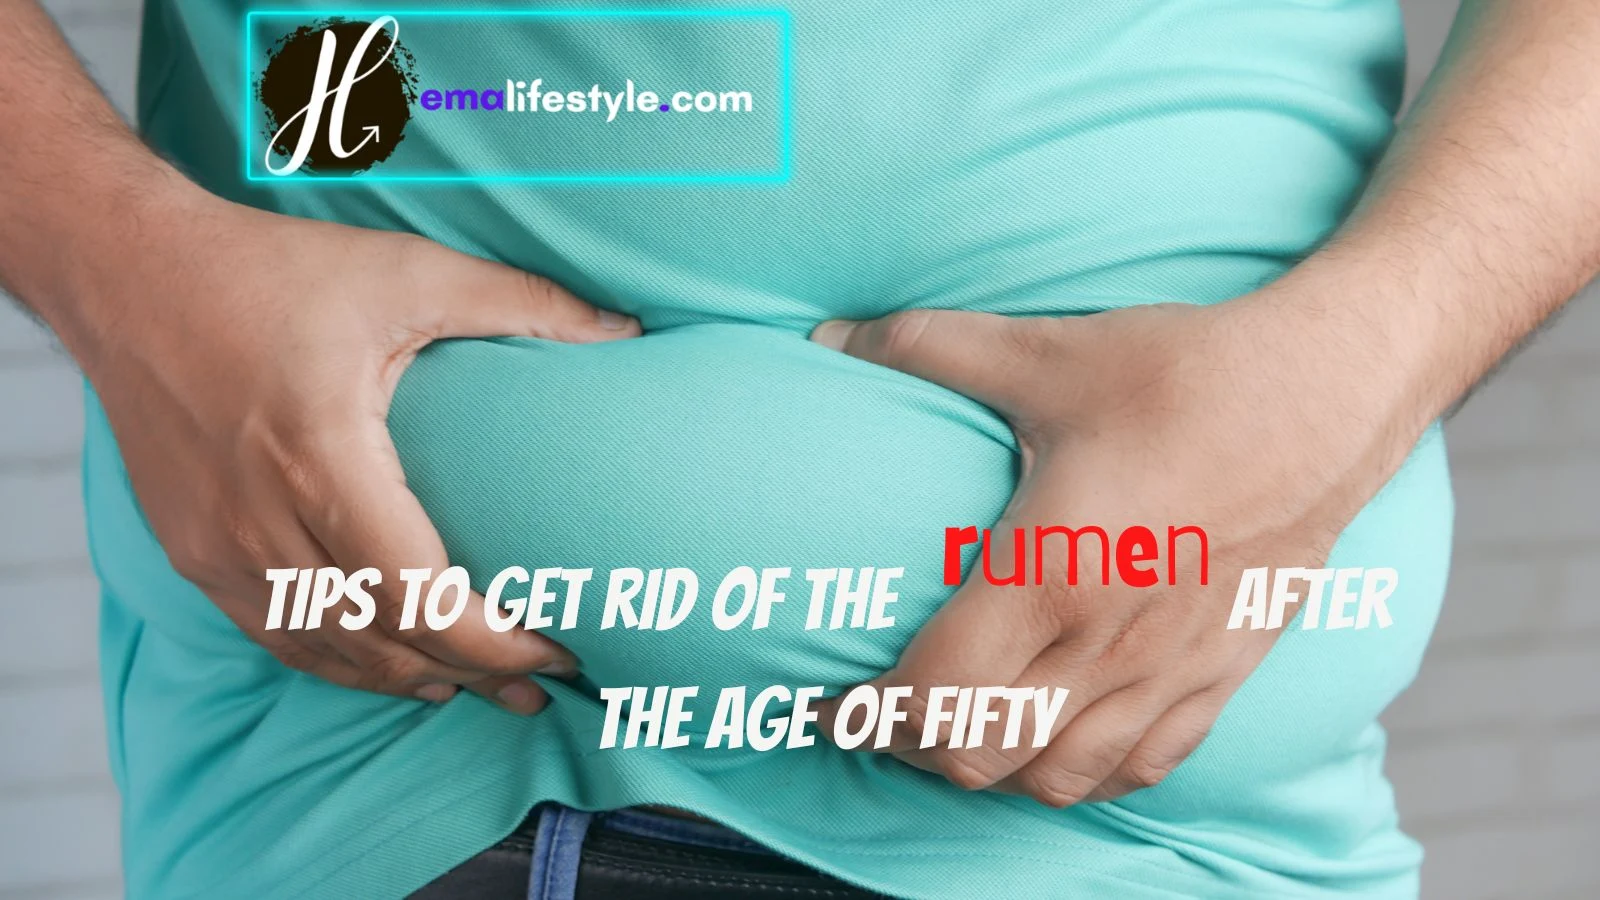 helps to have a flat tummy, flat stomach, muscle mass, eat proteins, Eating dietary fiber, Eat fish, Eating nuts, Eat fruits and vegetables, get rid of excess fat, get rid of excess, tips to get rid of the rumen, tips to get rid of the stomach fat, weight loss for women over 30, help losing weight after 30, need help losing weight after 50, help losing weight after 50, best way to lose weight after 50 woman, help with losing weight after 50, best way to lose weight for women over 50, best way to lose weight over 50 female